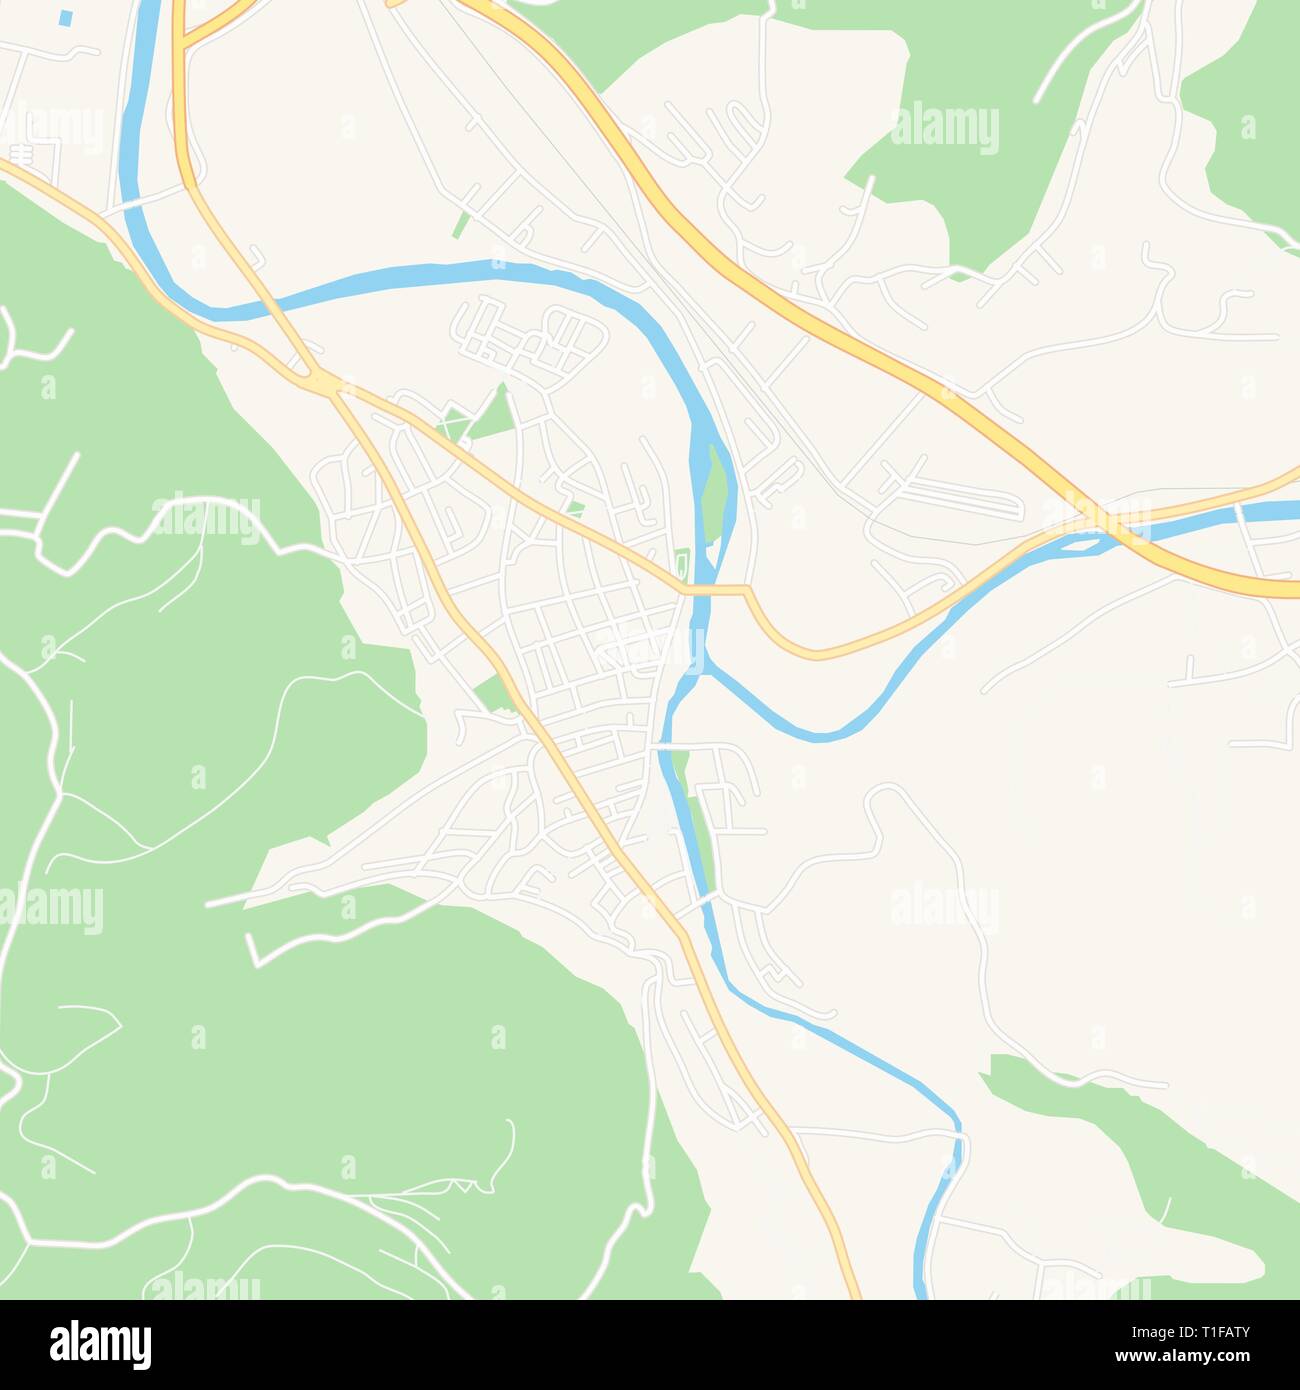 Printable map of Visoko, Bosnia and Herzegovina with main and secondary roads and larger railways. This map is carefully designed for routing and plac Stock Vector